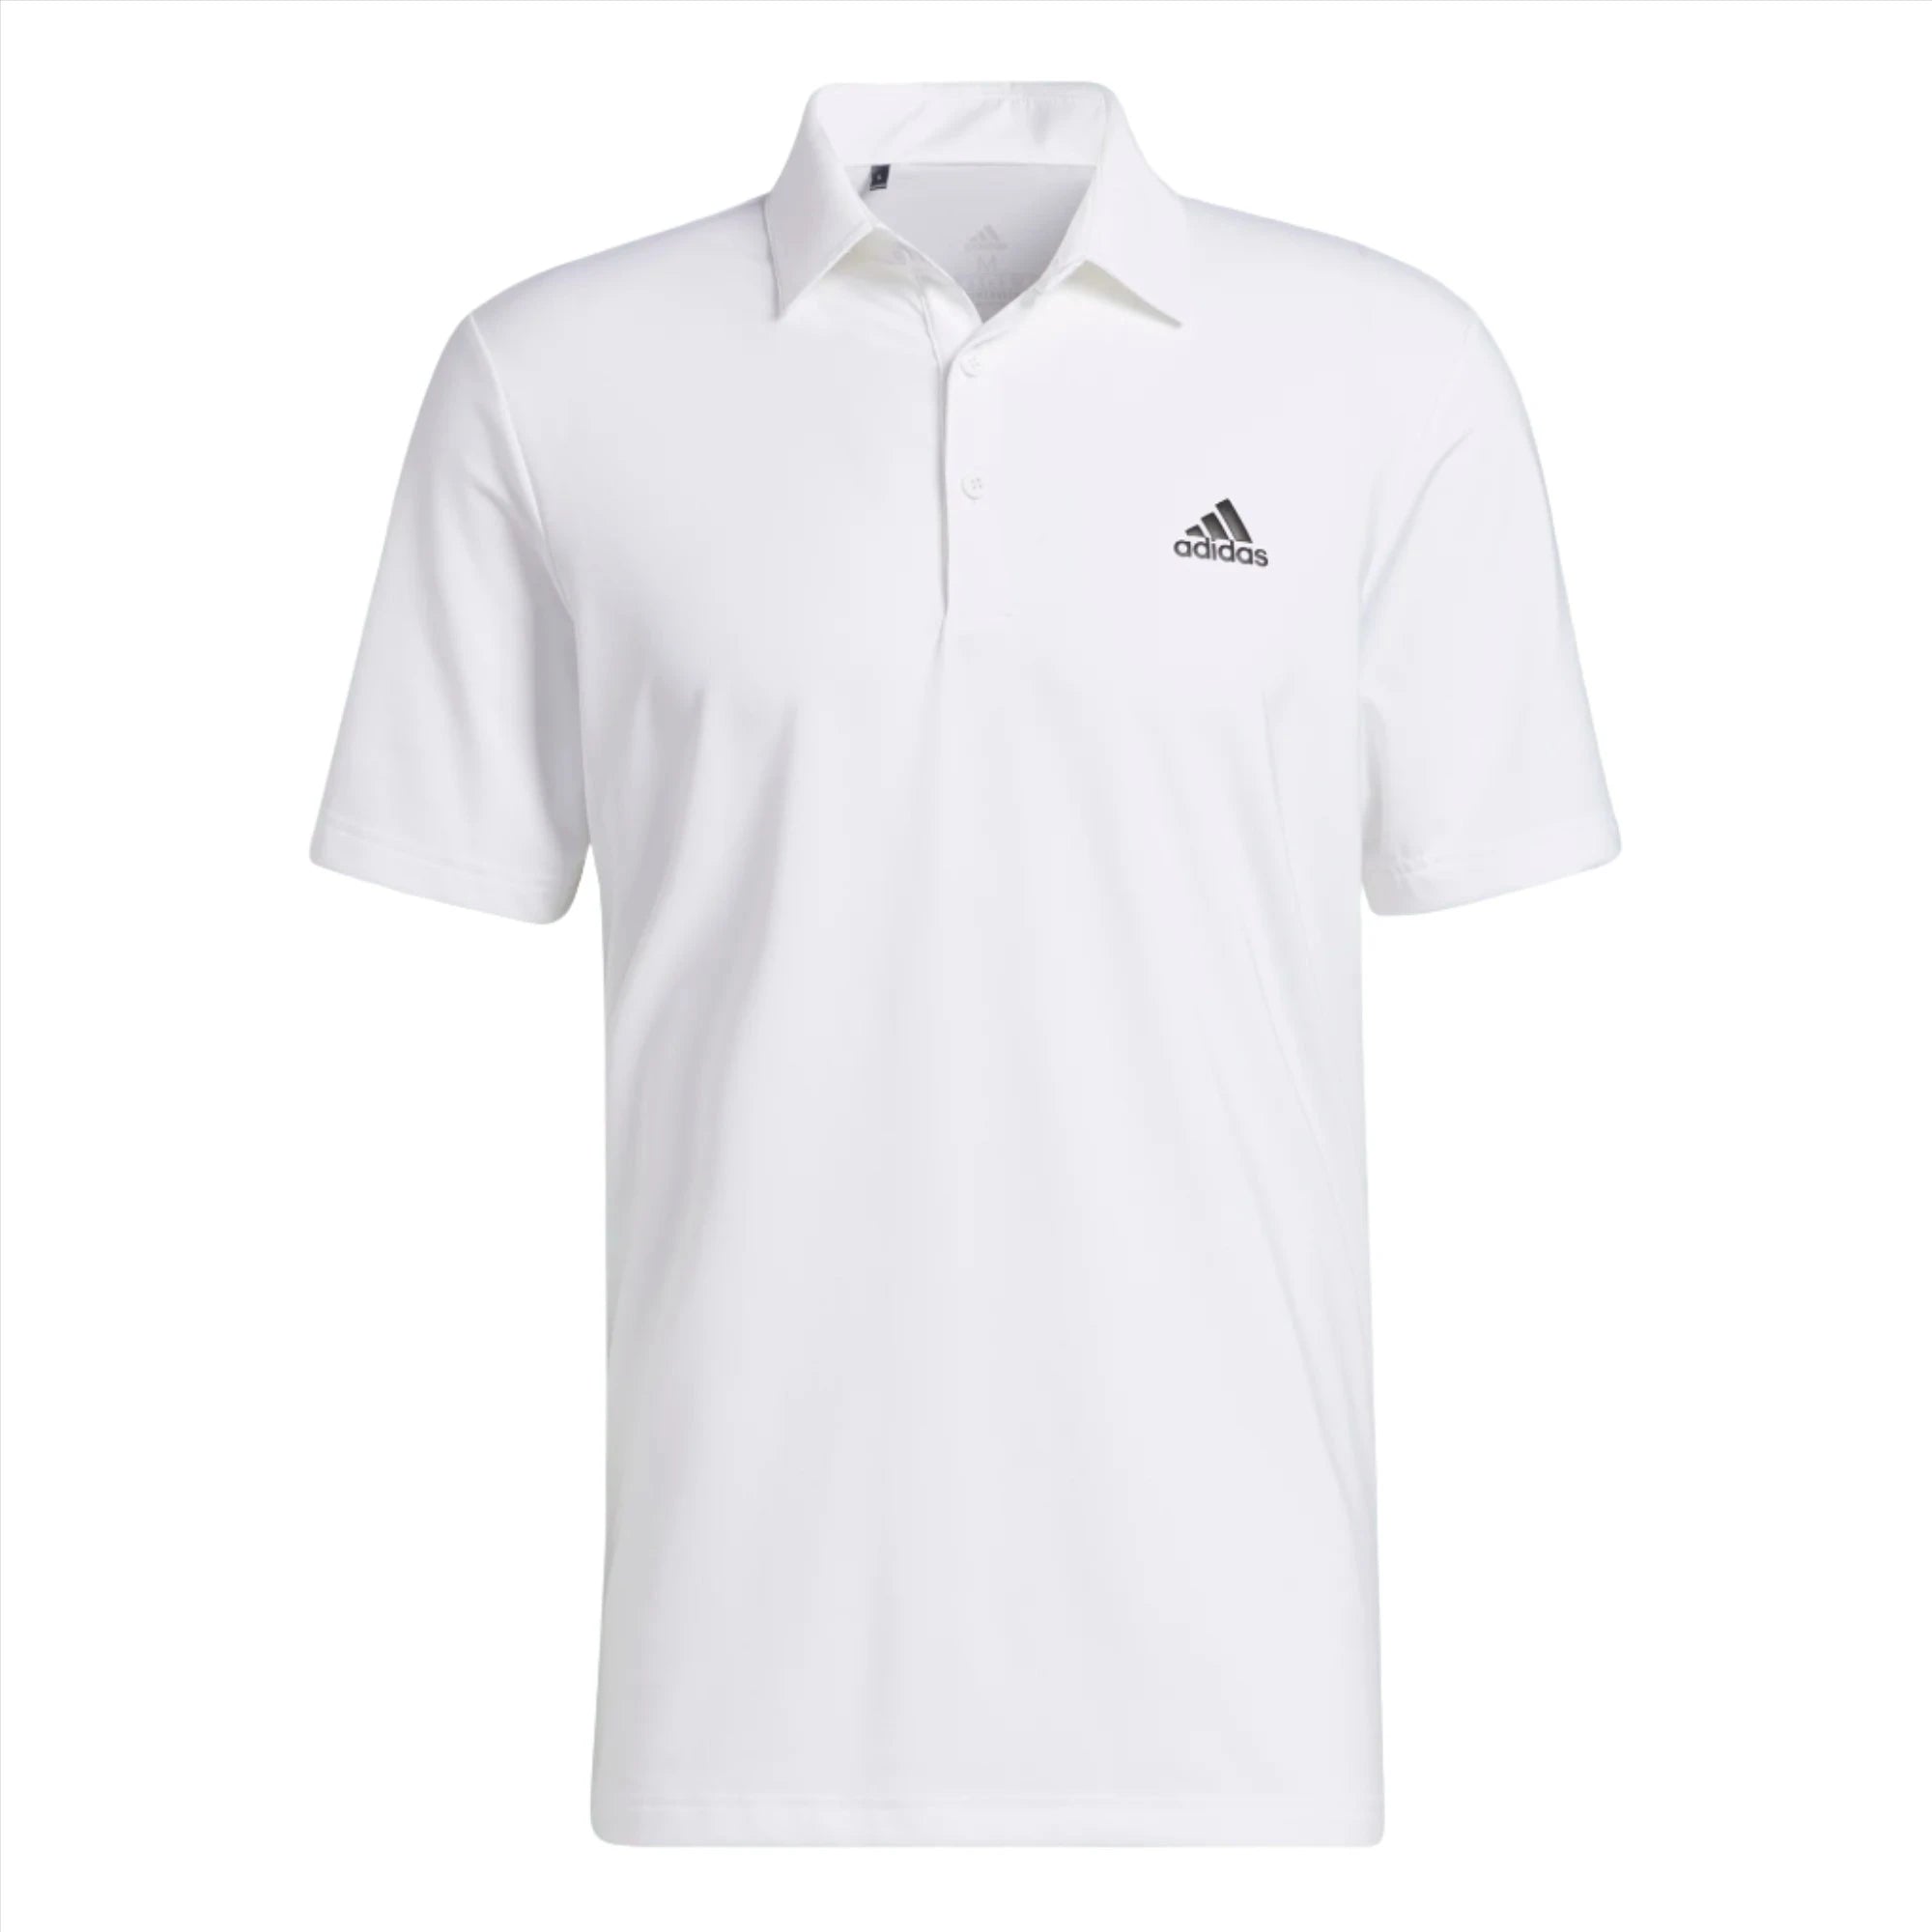 adidas Ultimate365 Solid Left Chest Golf Polo ADIDAS HOMBRE POLOS adidas